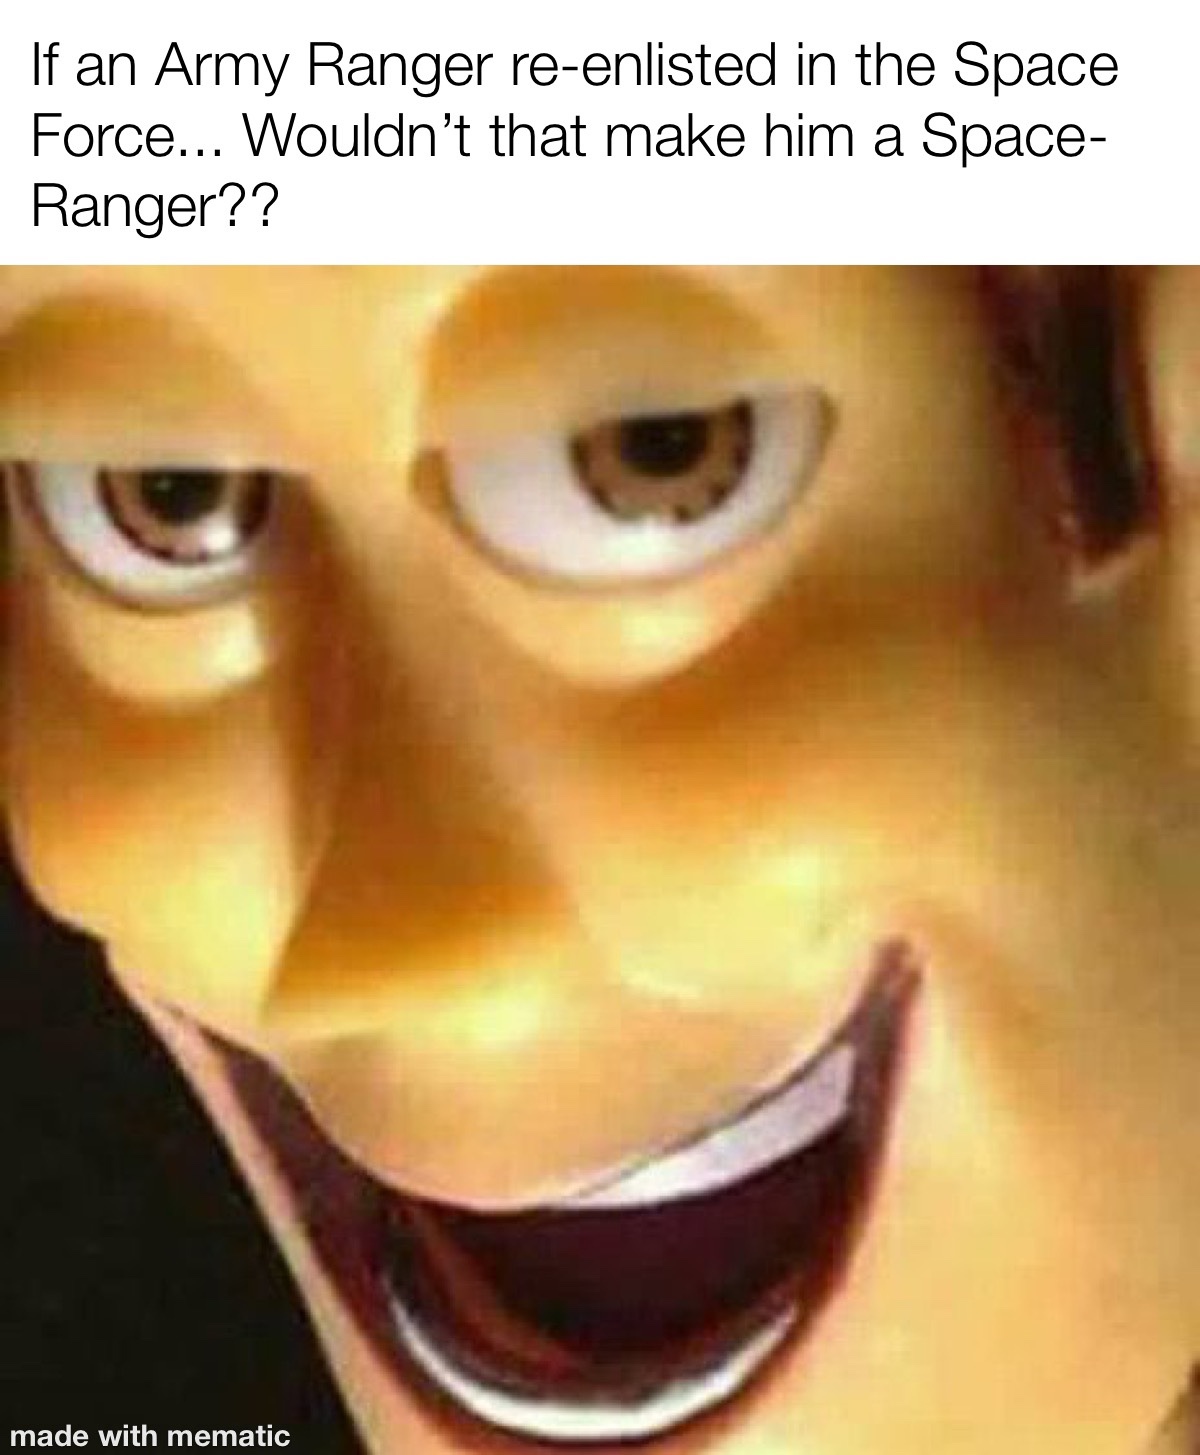 I think the word you are looking for is “Space Ranger” - meme